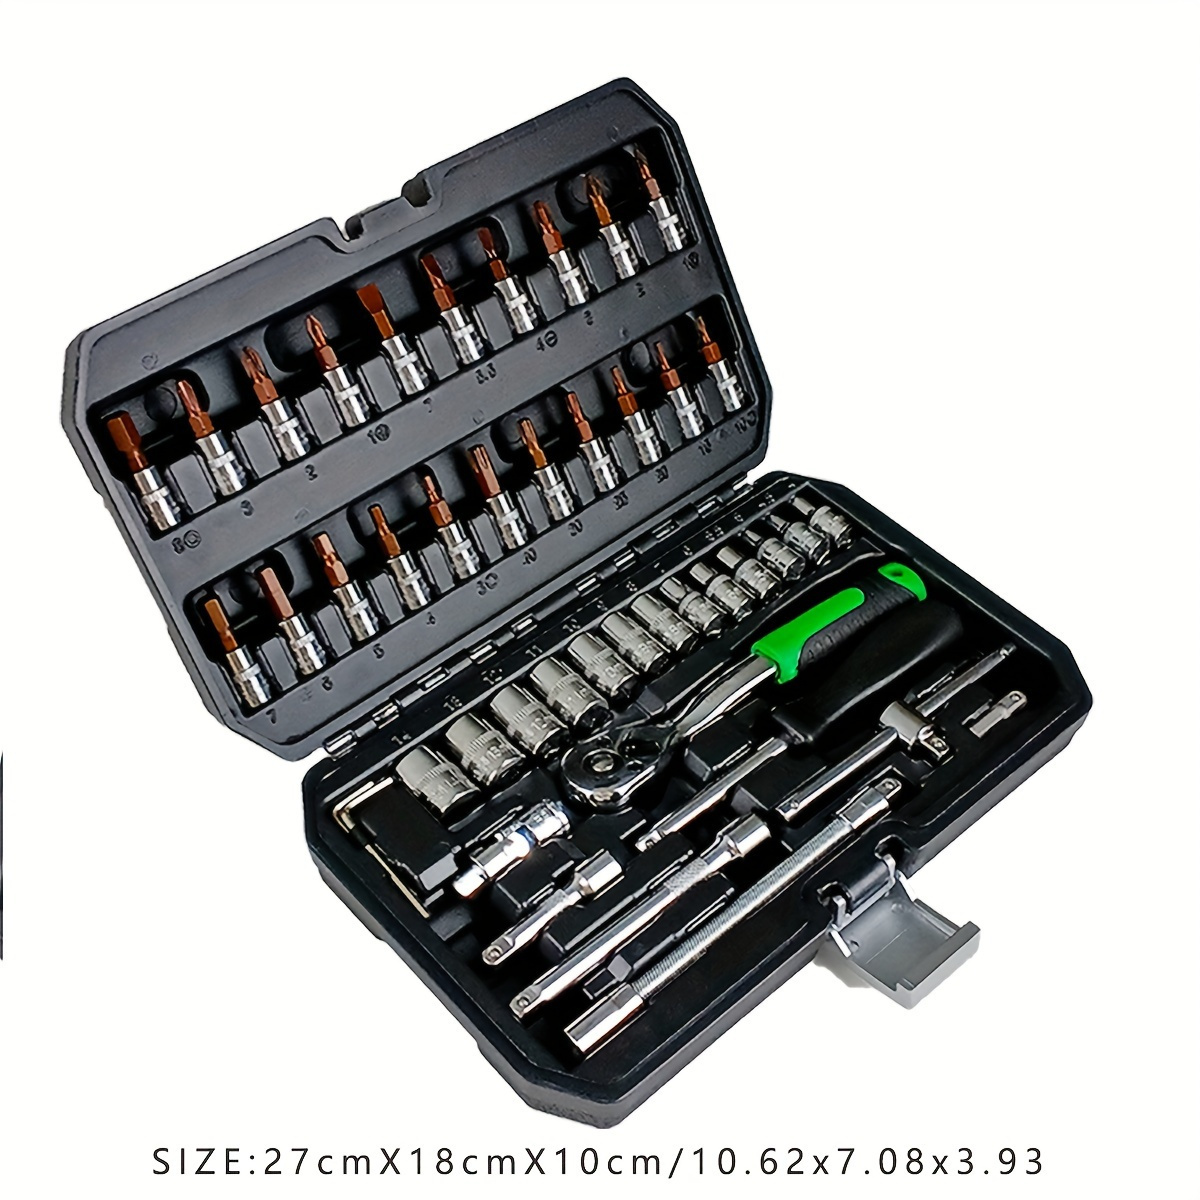 

46pcs/150pcsultimate Auto Mechanic Tool Kit - Premium Ratchet Torque Wrench & Diverse Screwdriver Set - Ultra-portable, All-in-one Solution For Car, Bike, & Motorcycle Maintenance